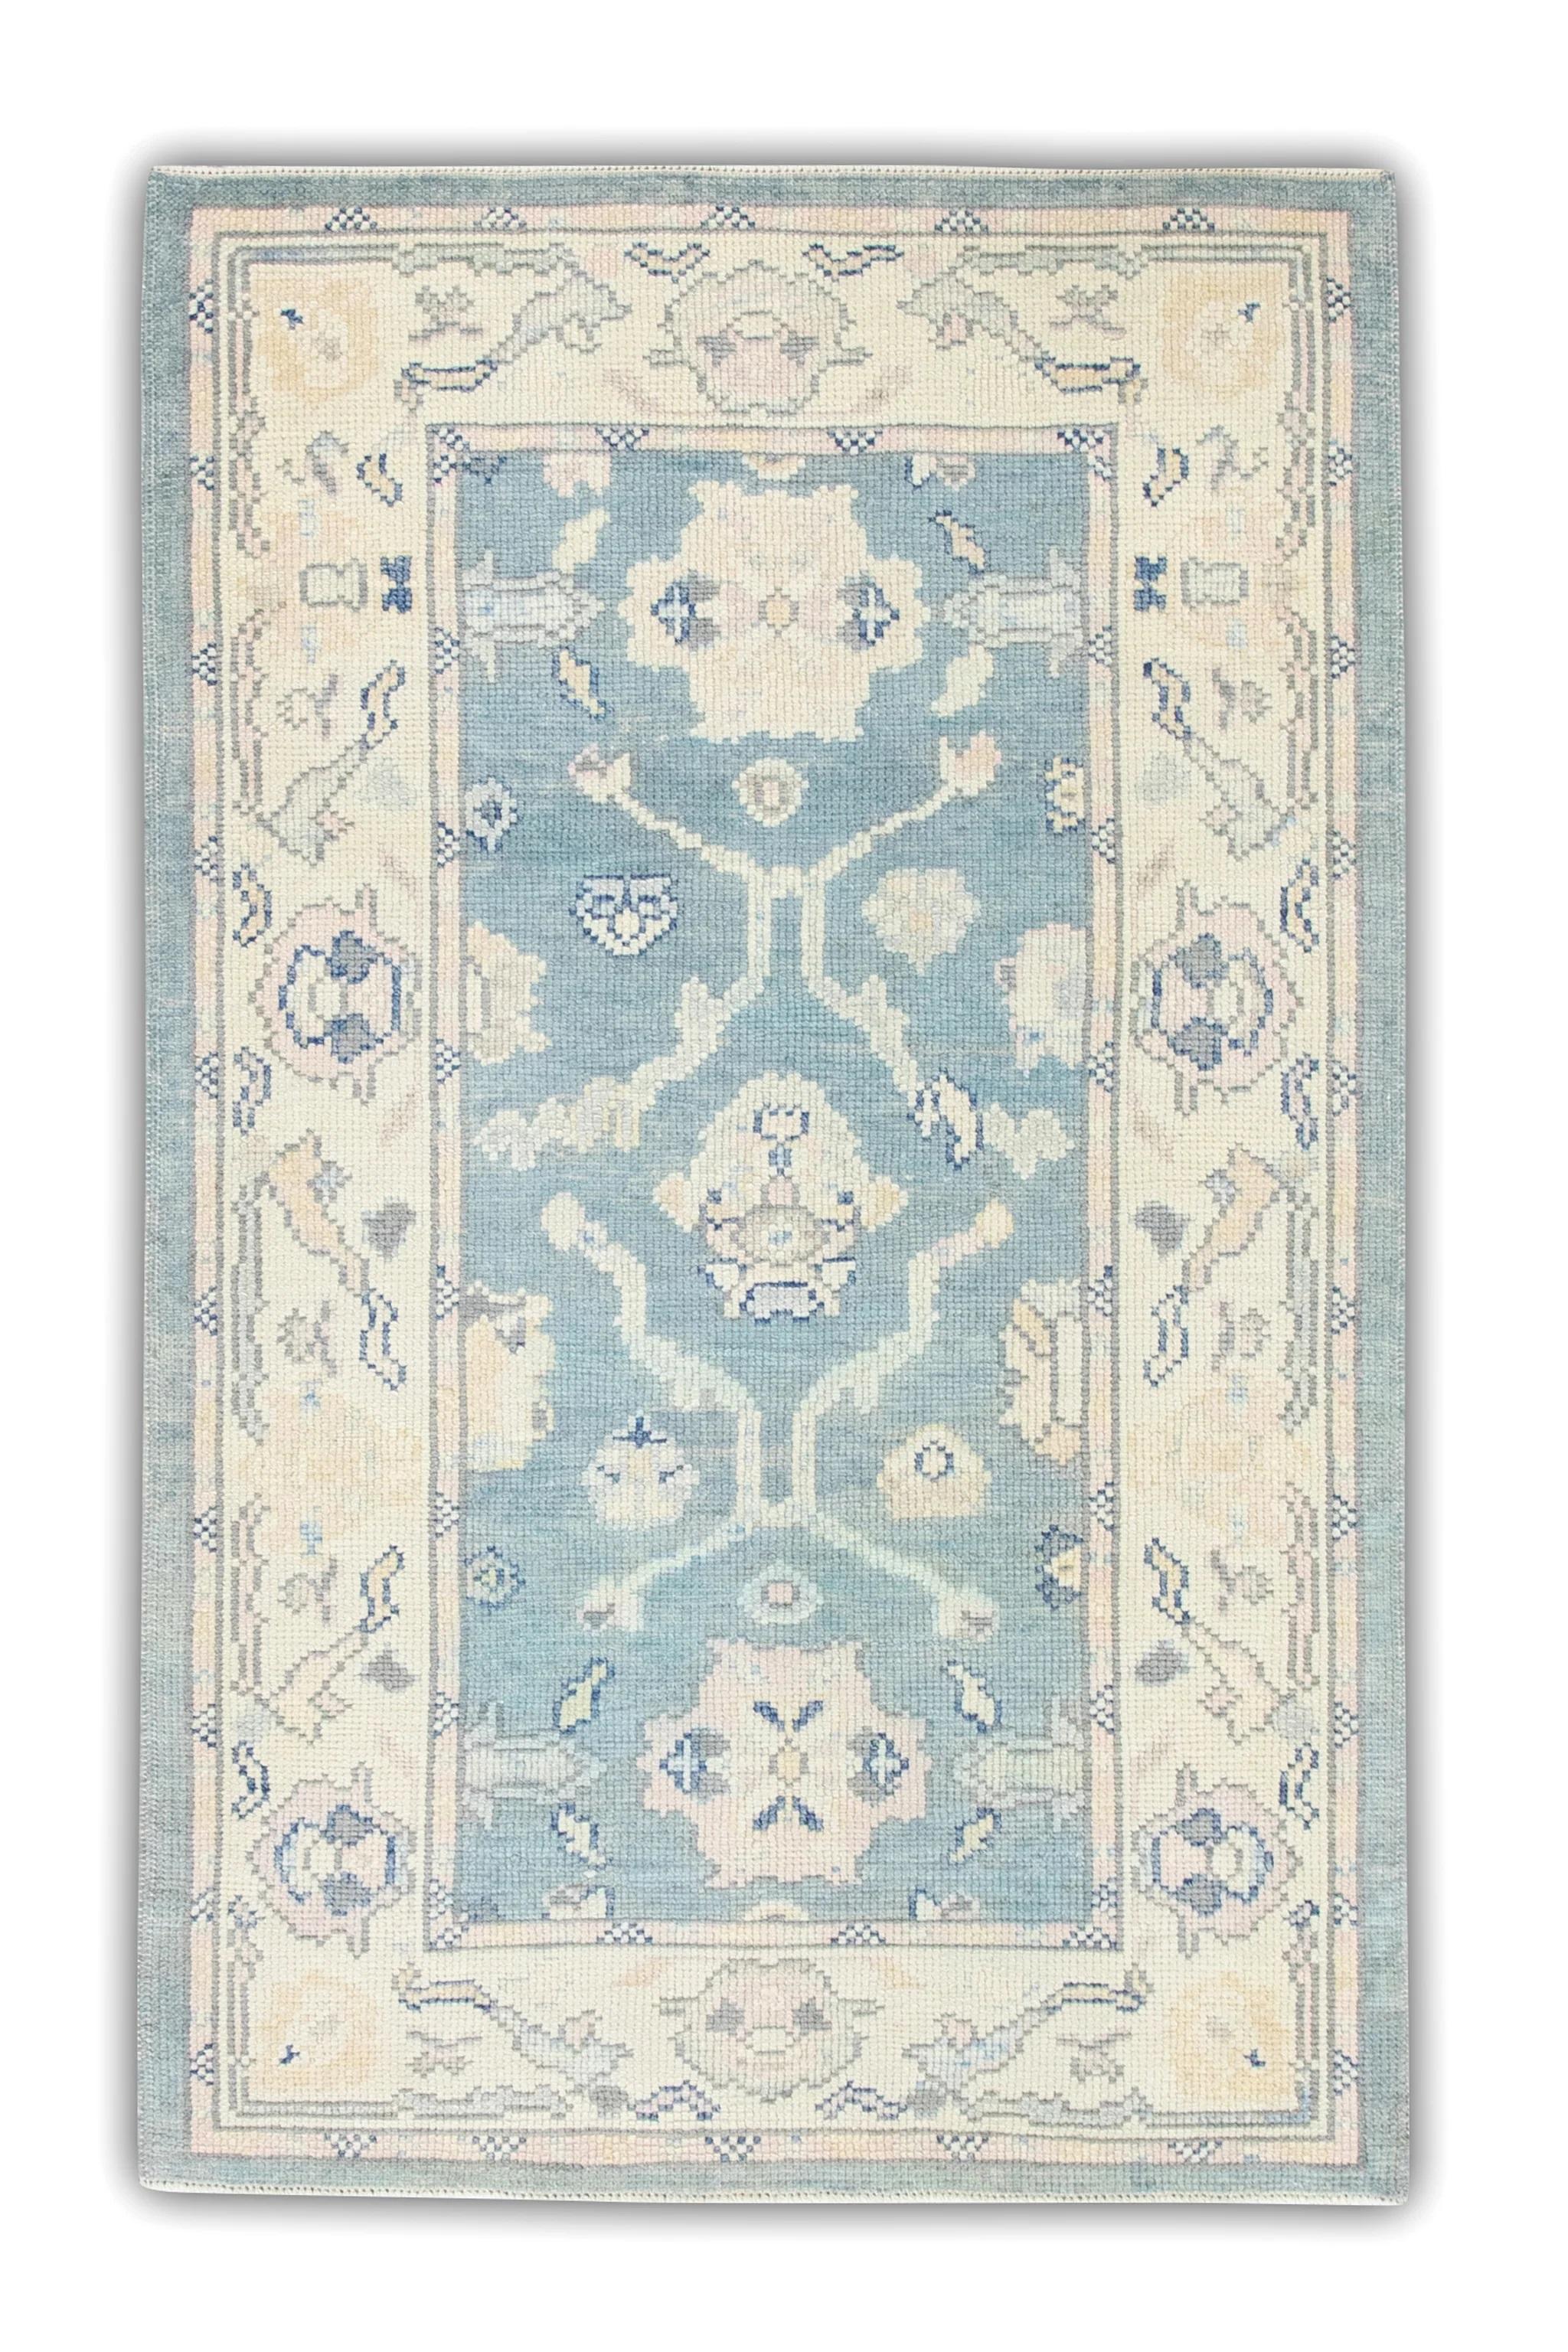 Contemporary Handwoven Wool Turkish Oushak Rug in Blue Floral Design 3' x 4'10